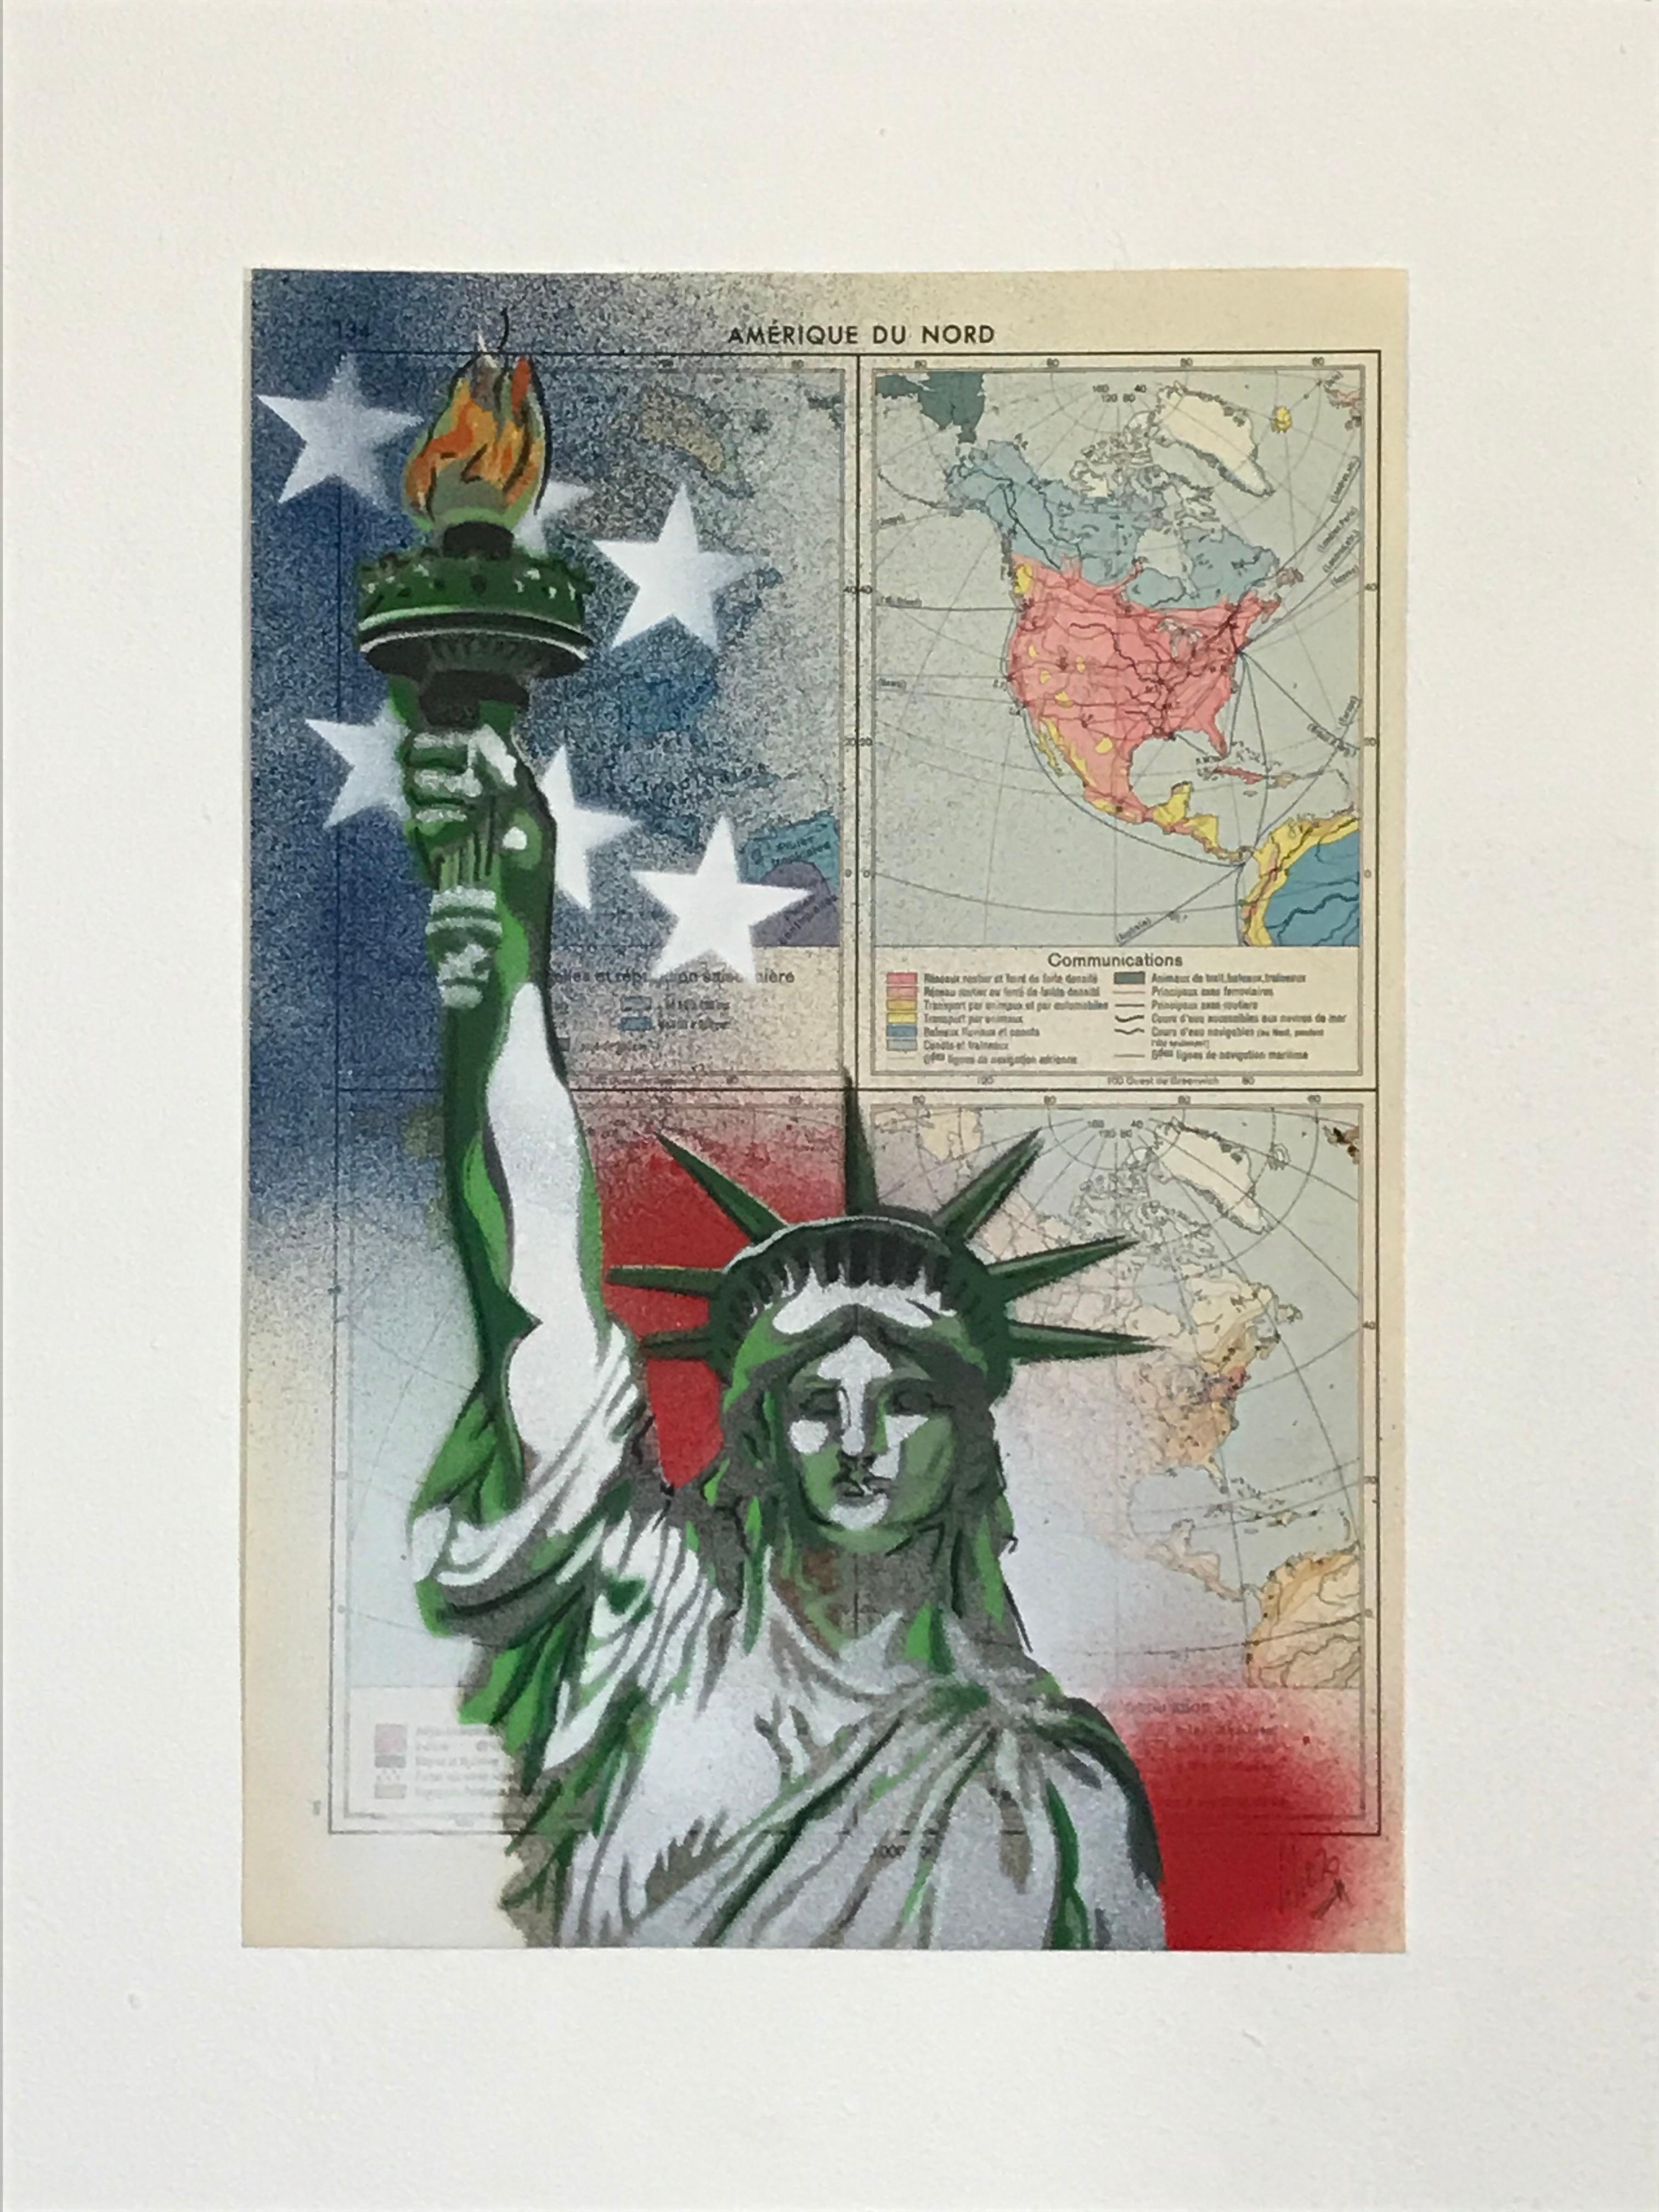 Christophe Stouvenel
North America Map
Multi-layered stencils on 1958 geography atlas map
Creation date 2020
Format 21 x 30.2 cm
Signed lower right and countersigned on the reverse.
PRICE: 190 euros